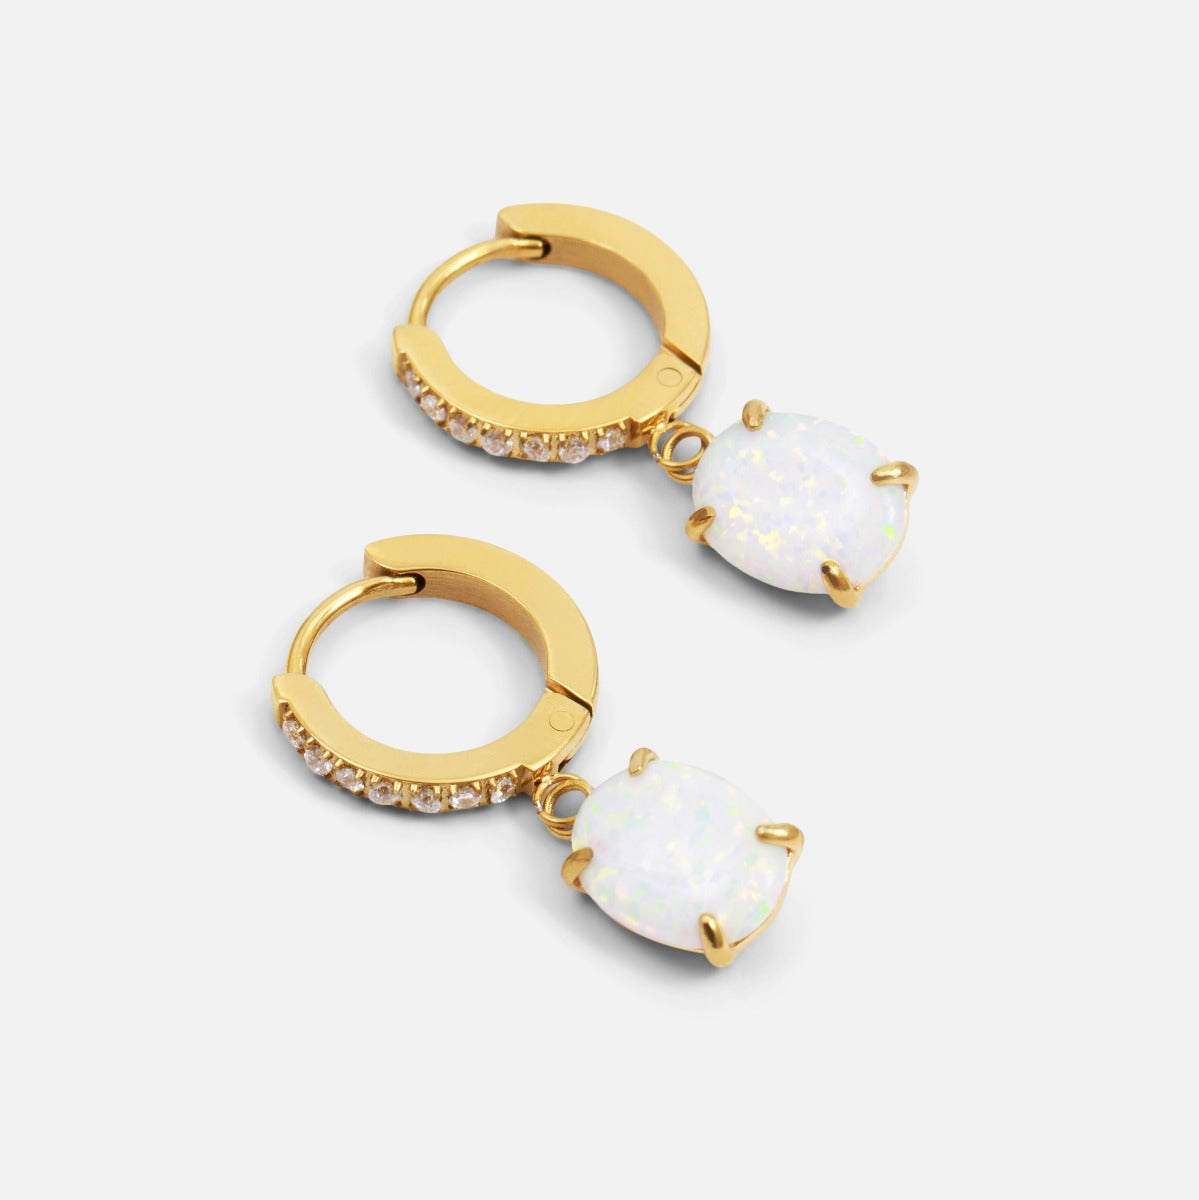 Golden stainless steel huggies earrings with opal effect charm